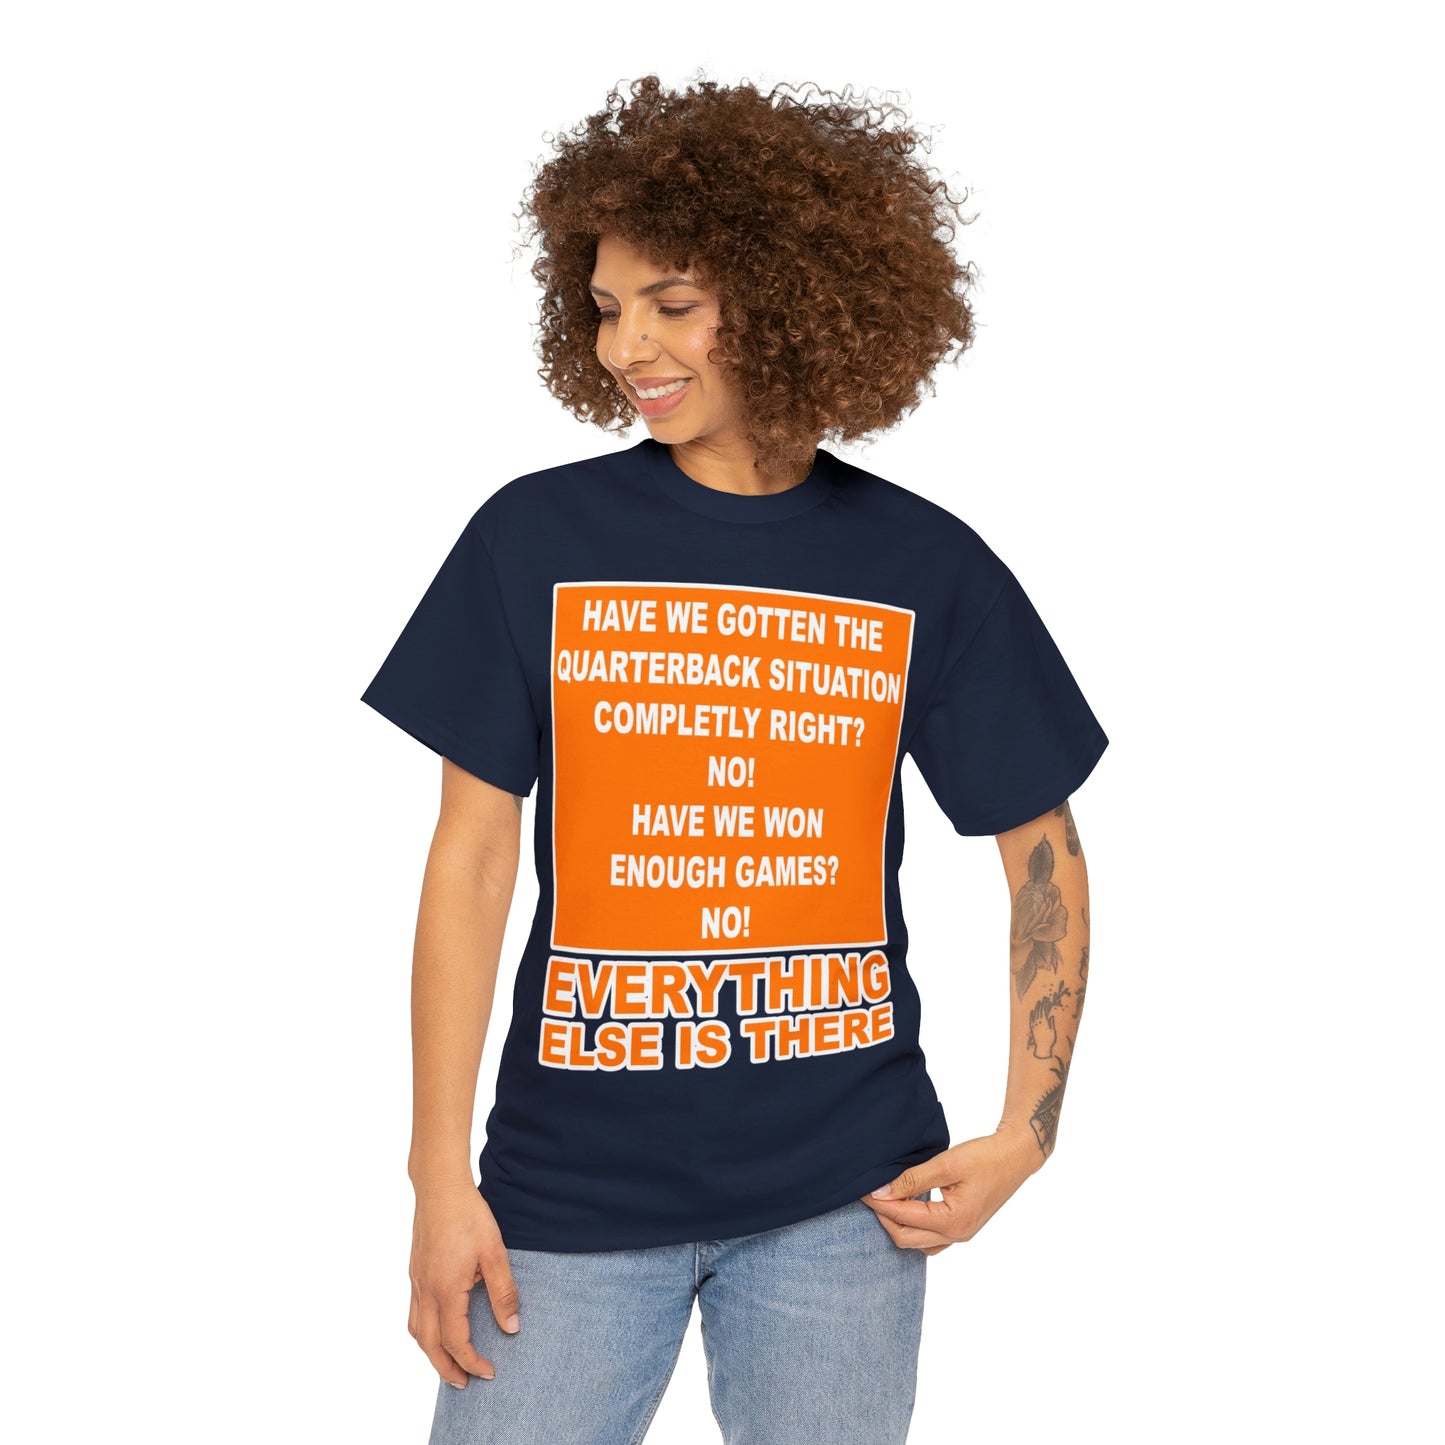 George McCaskey Quote Shirt Up to 5X